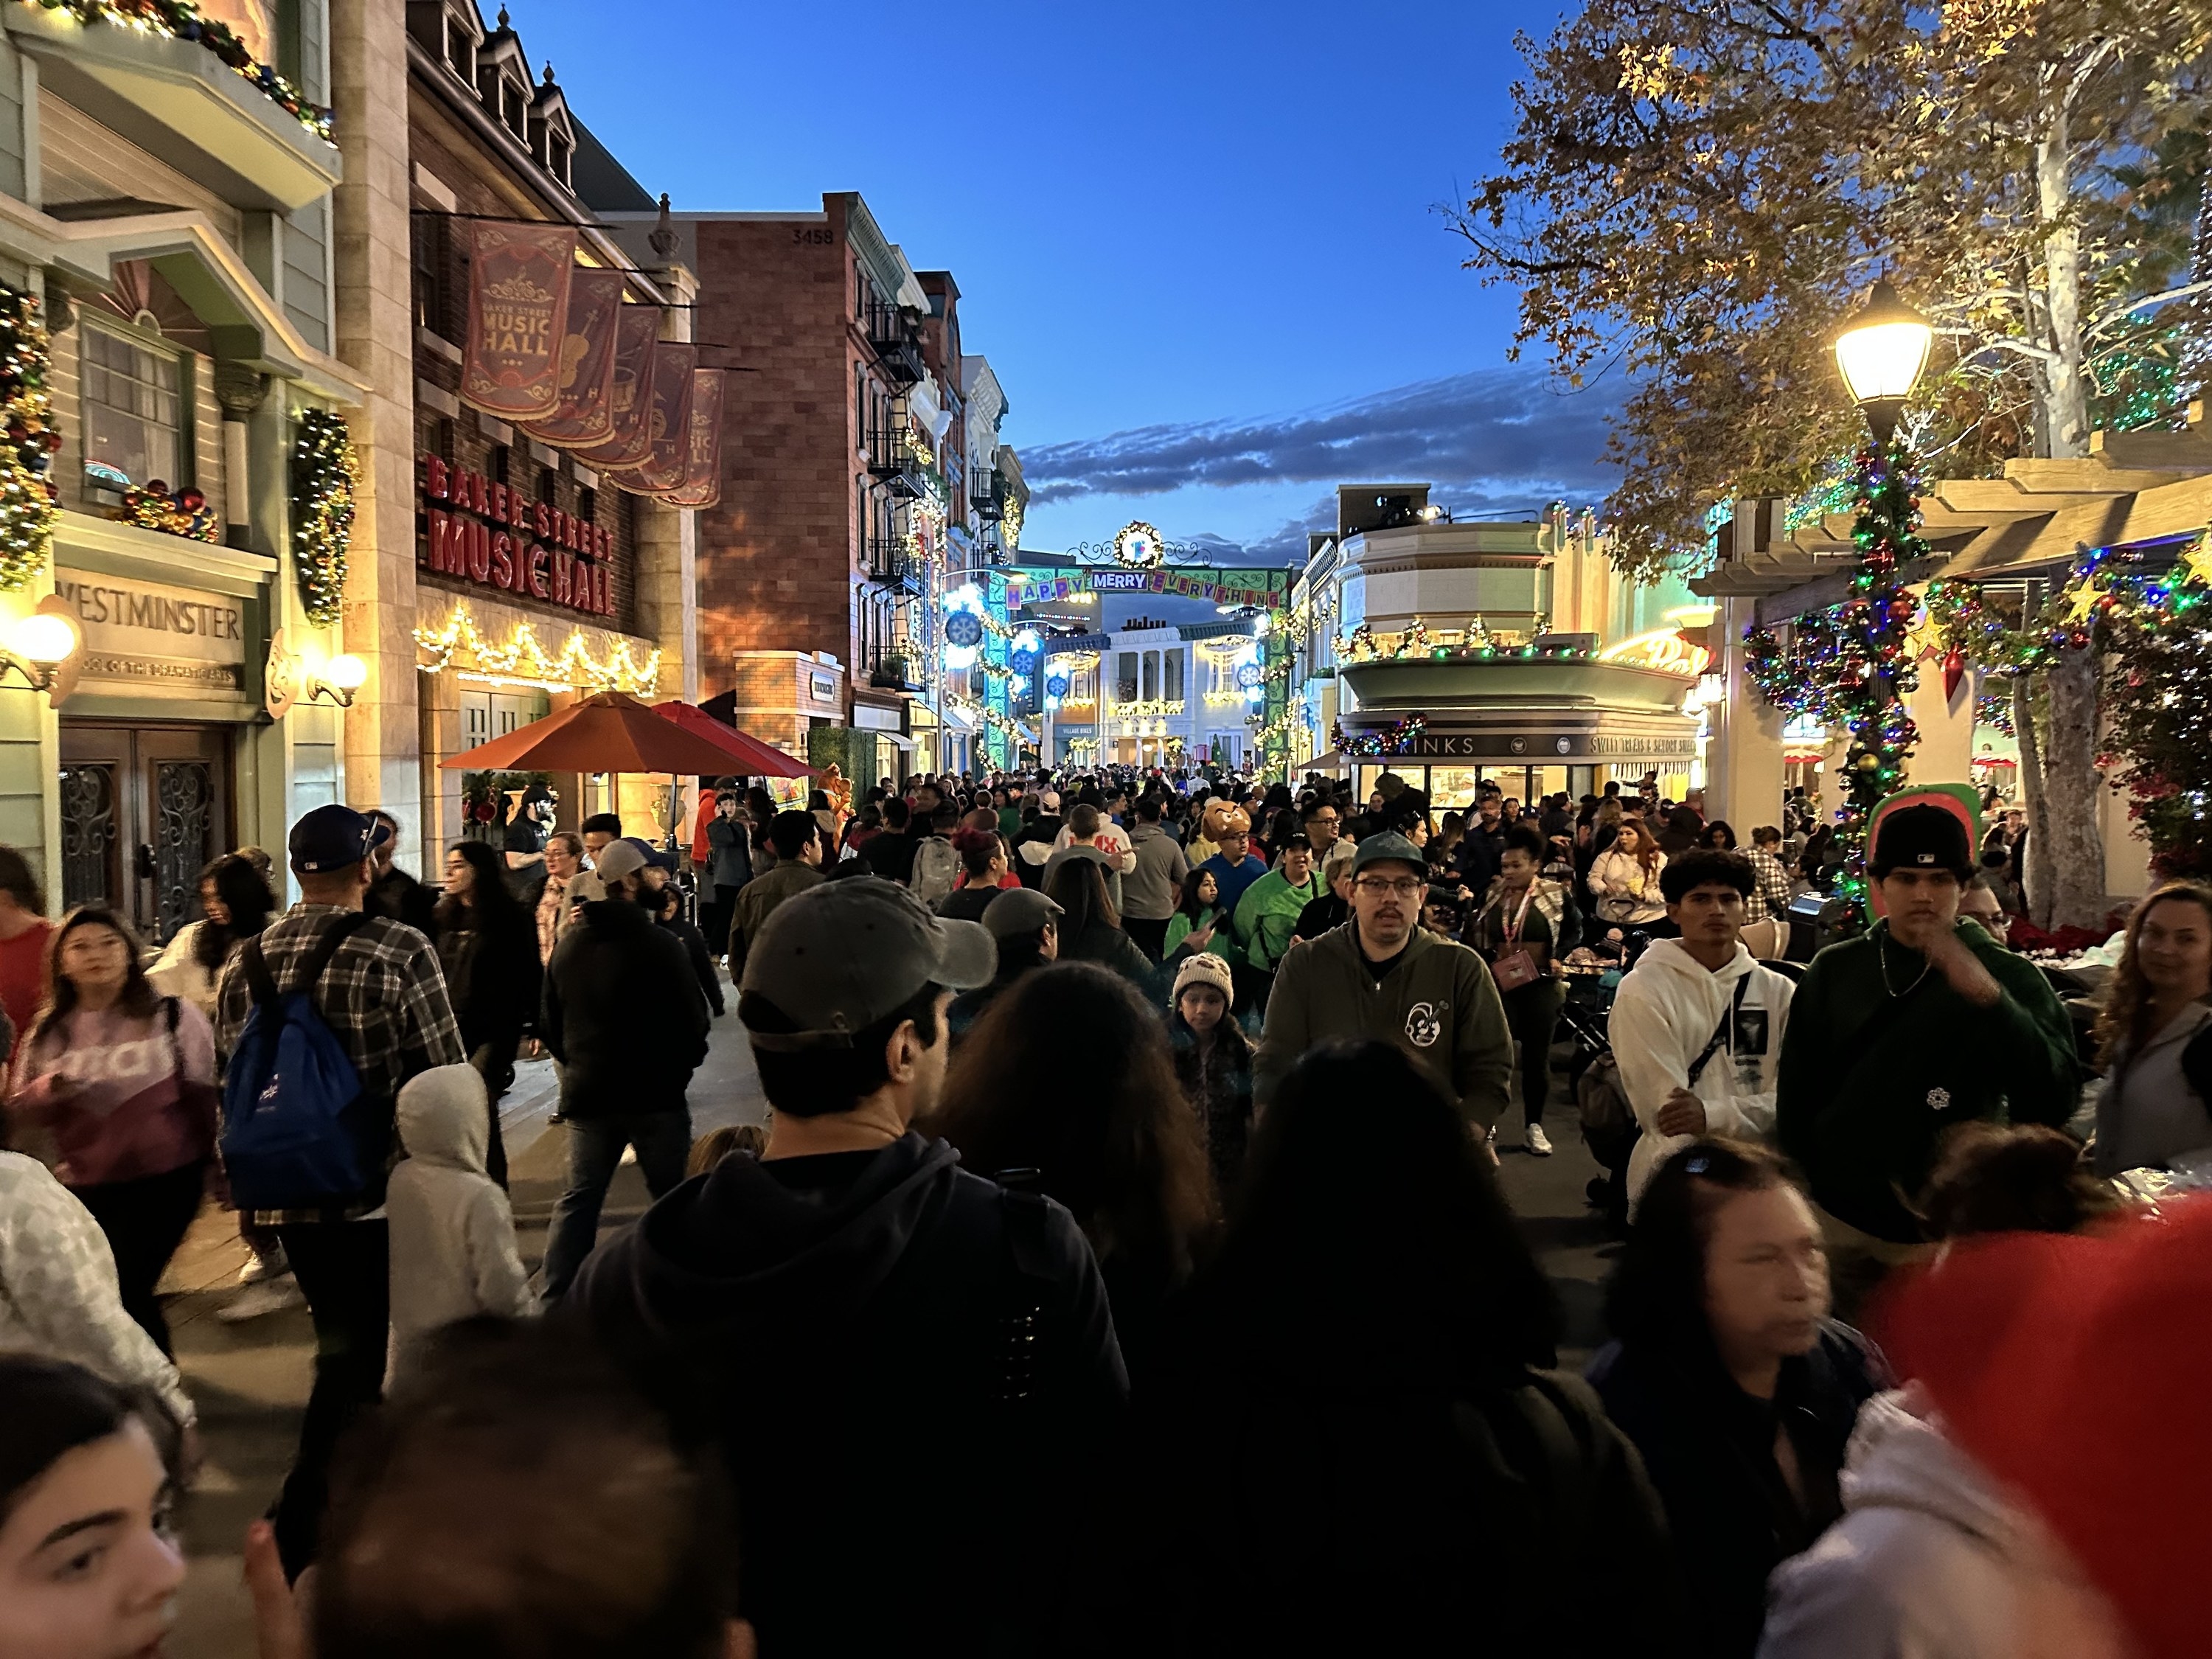 Crowds of people on the street